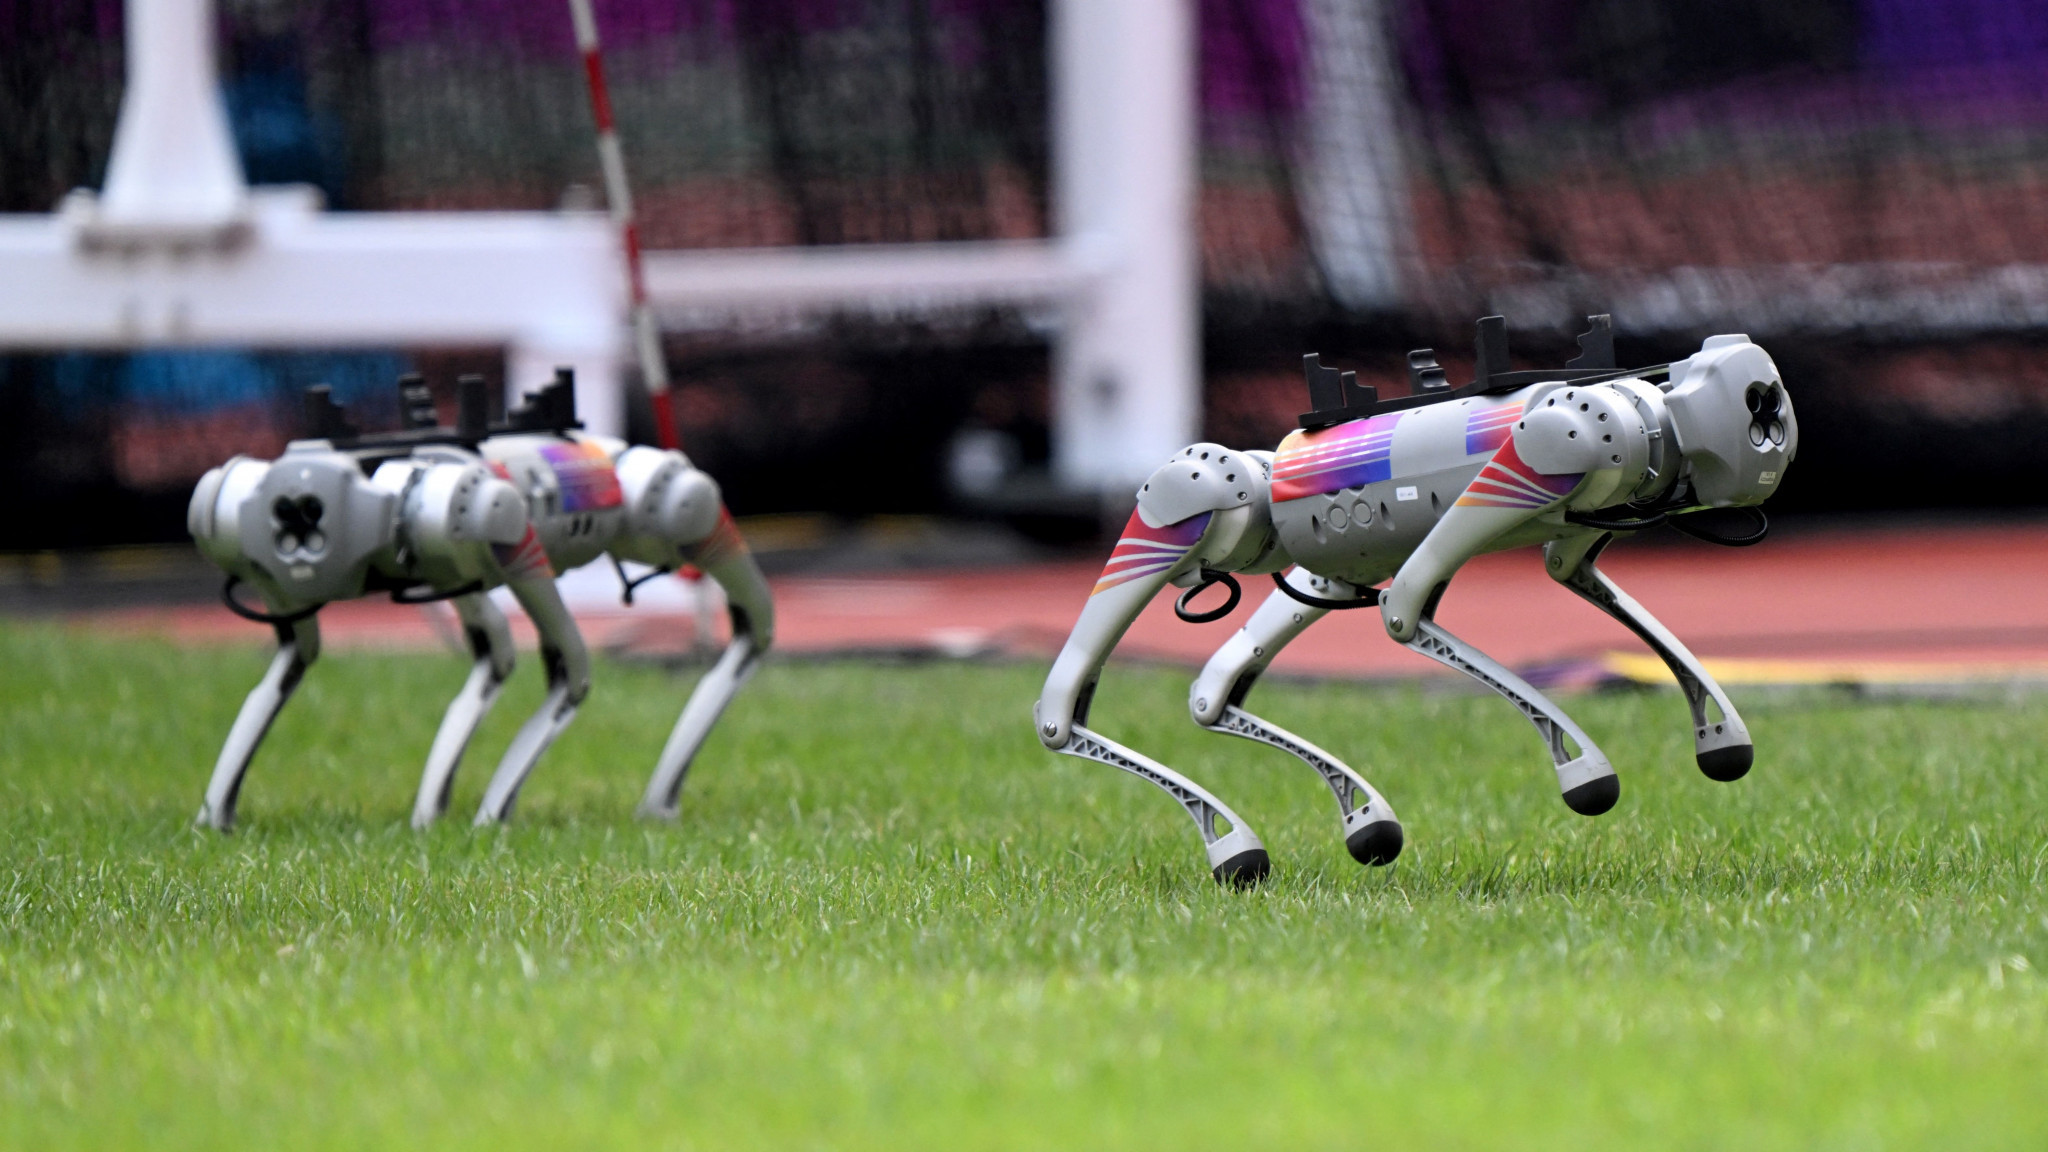 Robot dogs are among the technological features of the Asian Games in Hangzhou ©Getty Images